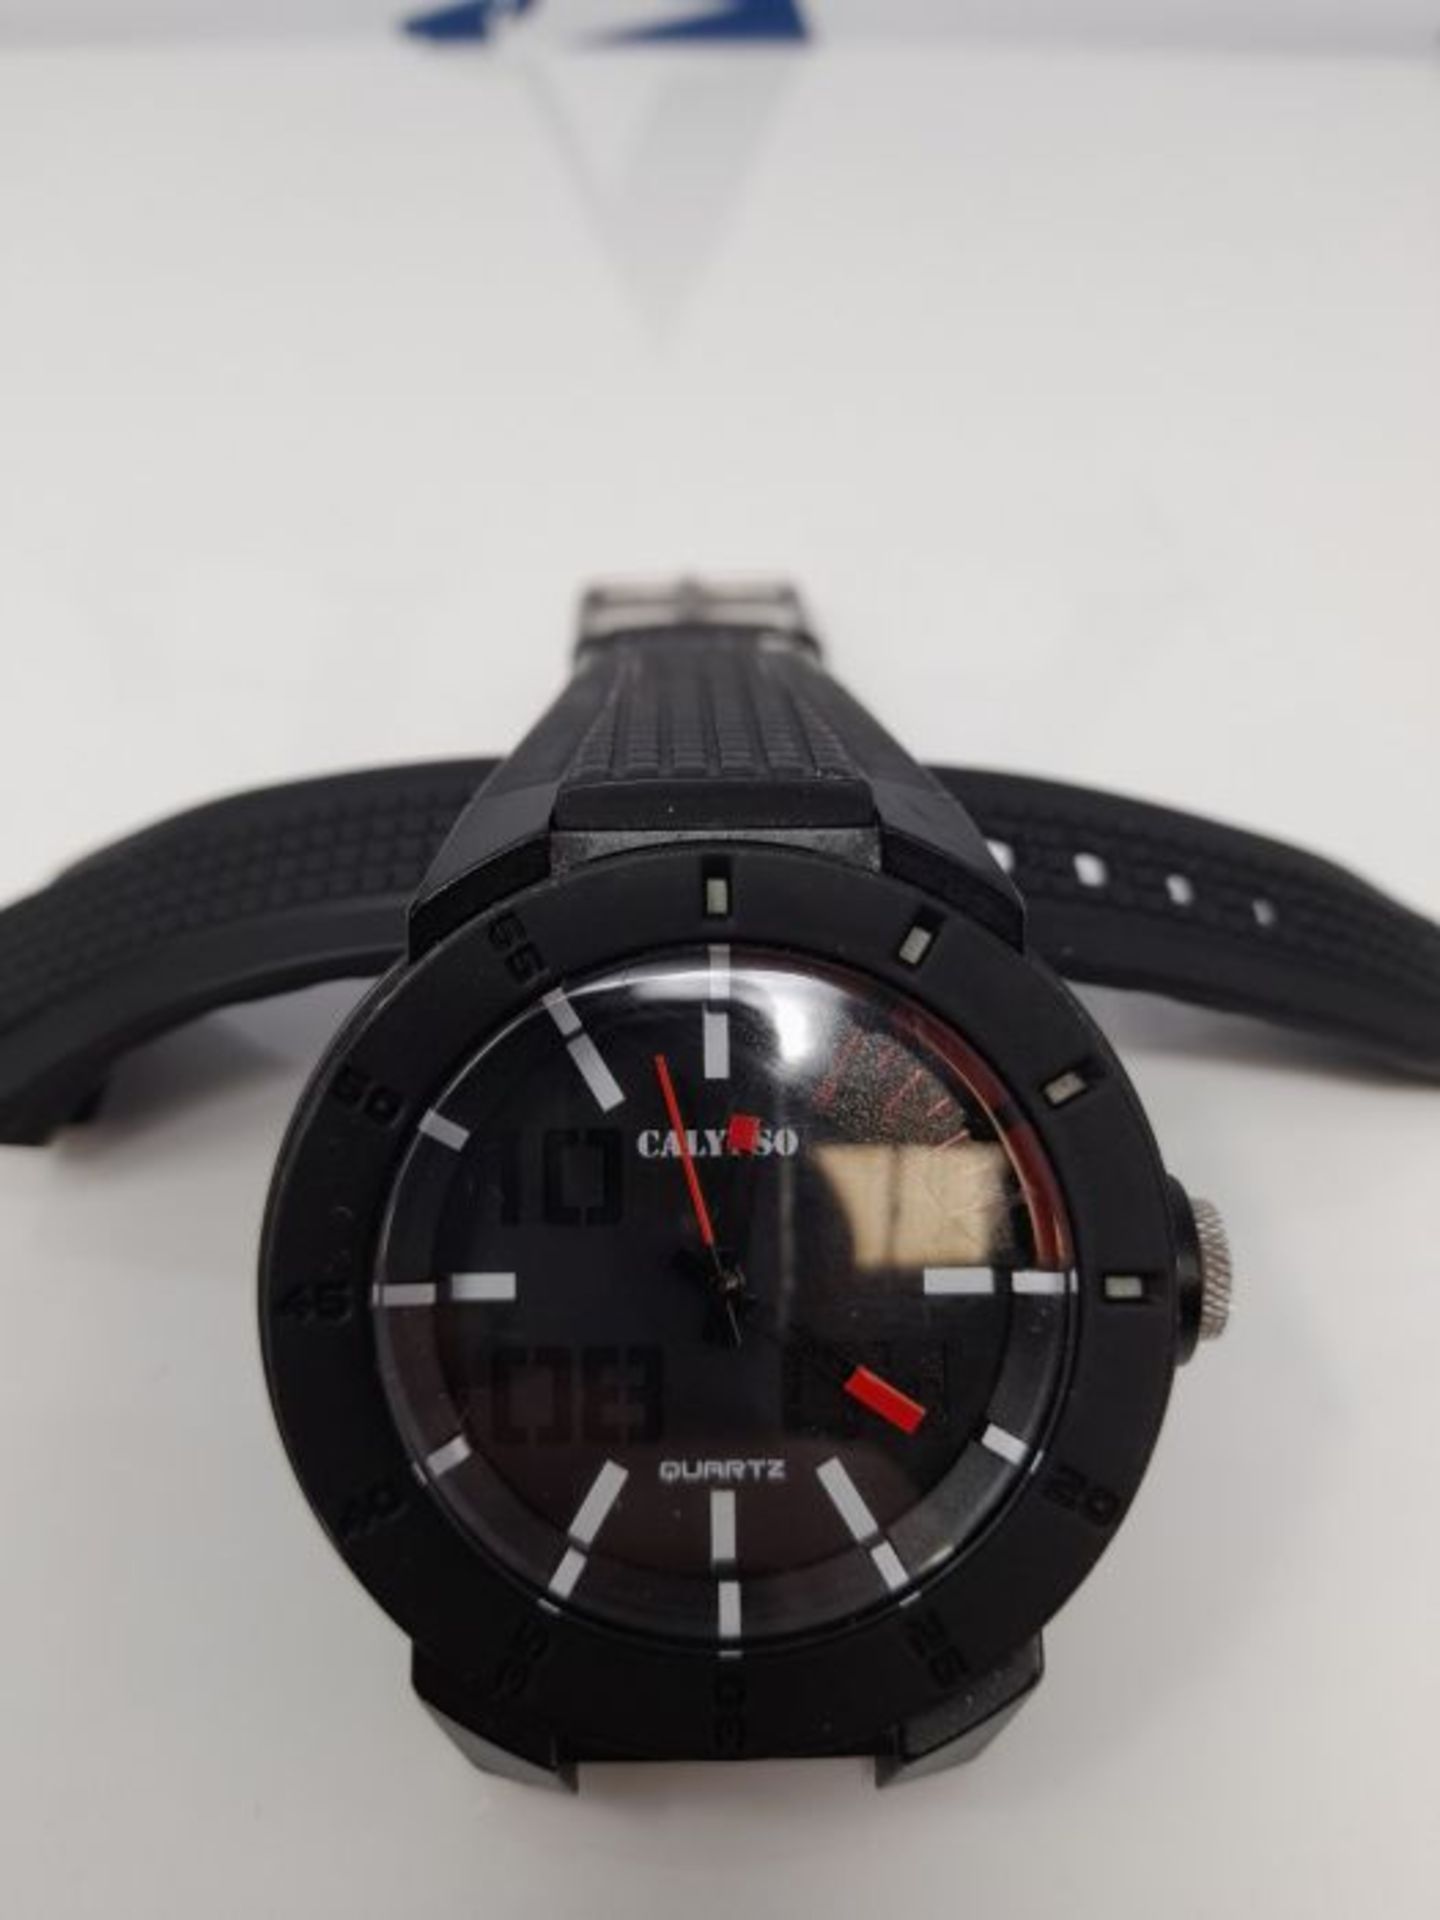 Calypso Men's Quartz Watch with Black Dial Analogue Display and Black Plastic Strap K5 - Image 3 of 3